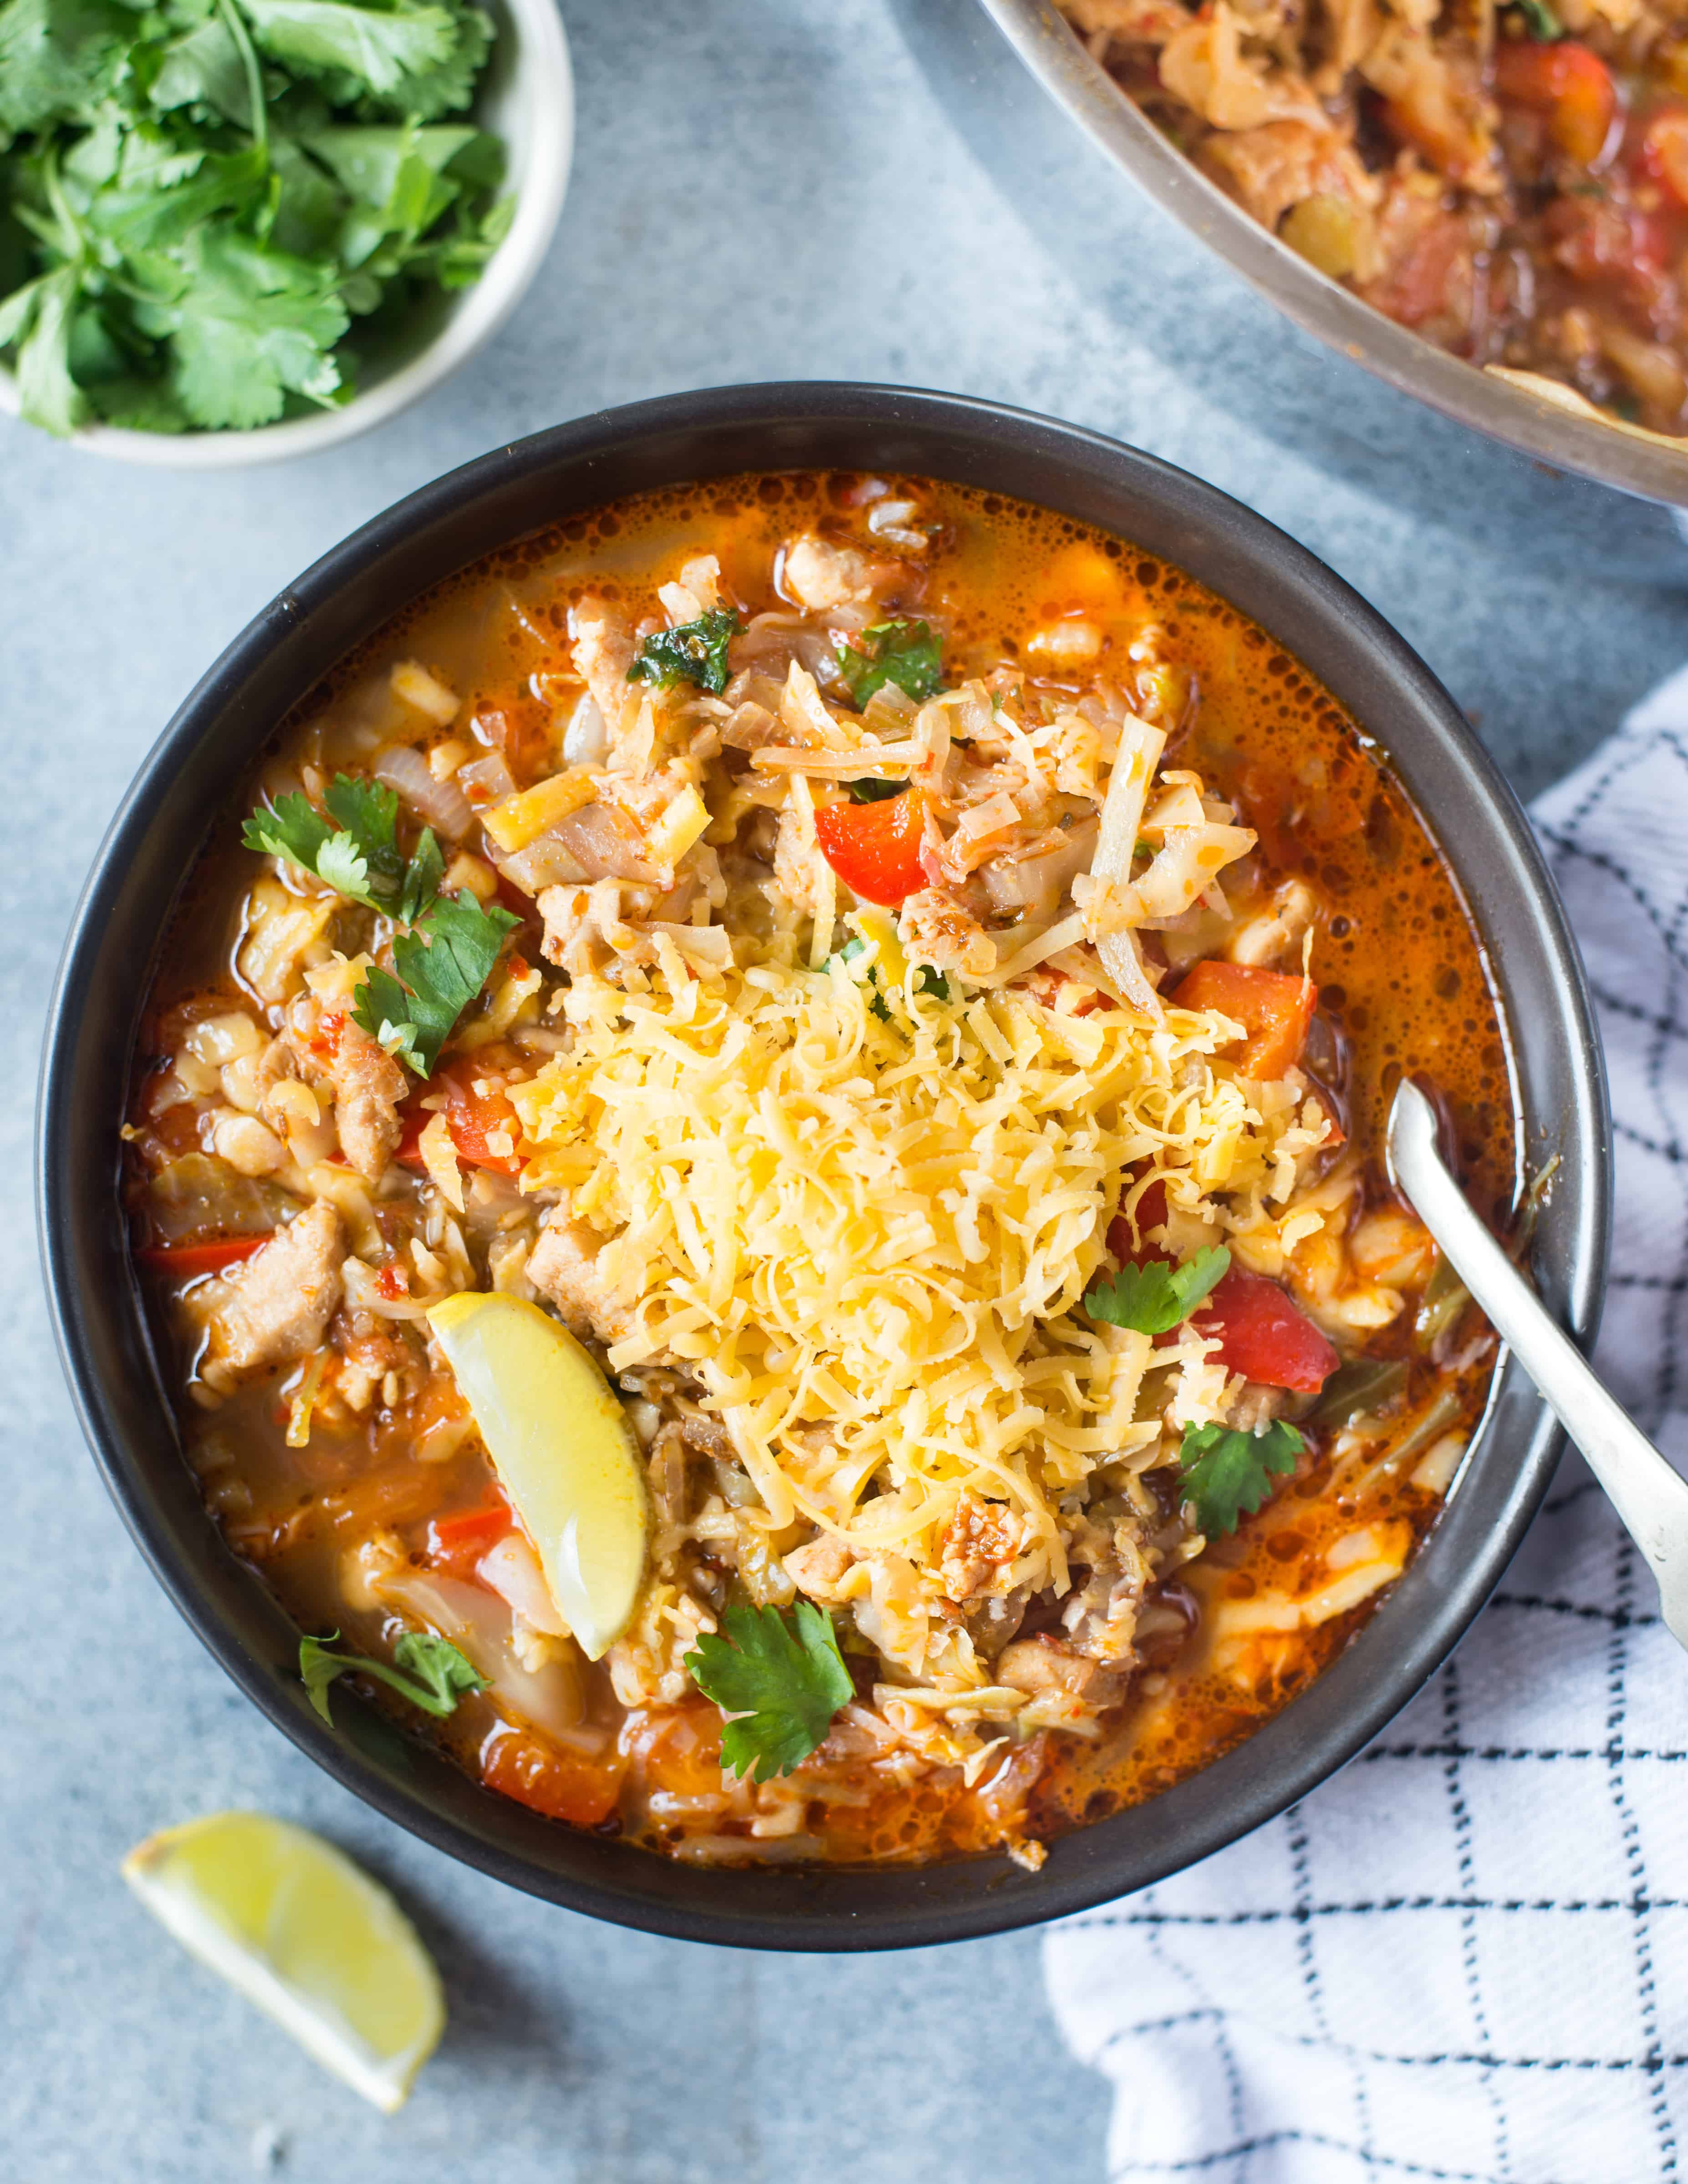 This Low Carb Chicken Taco Soup is light, healthy and perfect if you are on a weight loss journey. It is also a Keto friendly recipe. Just add Corn, Kidney beans and top it with nachos to make it more wholesome.